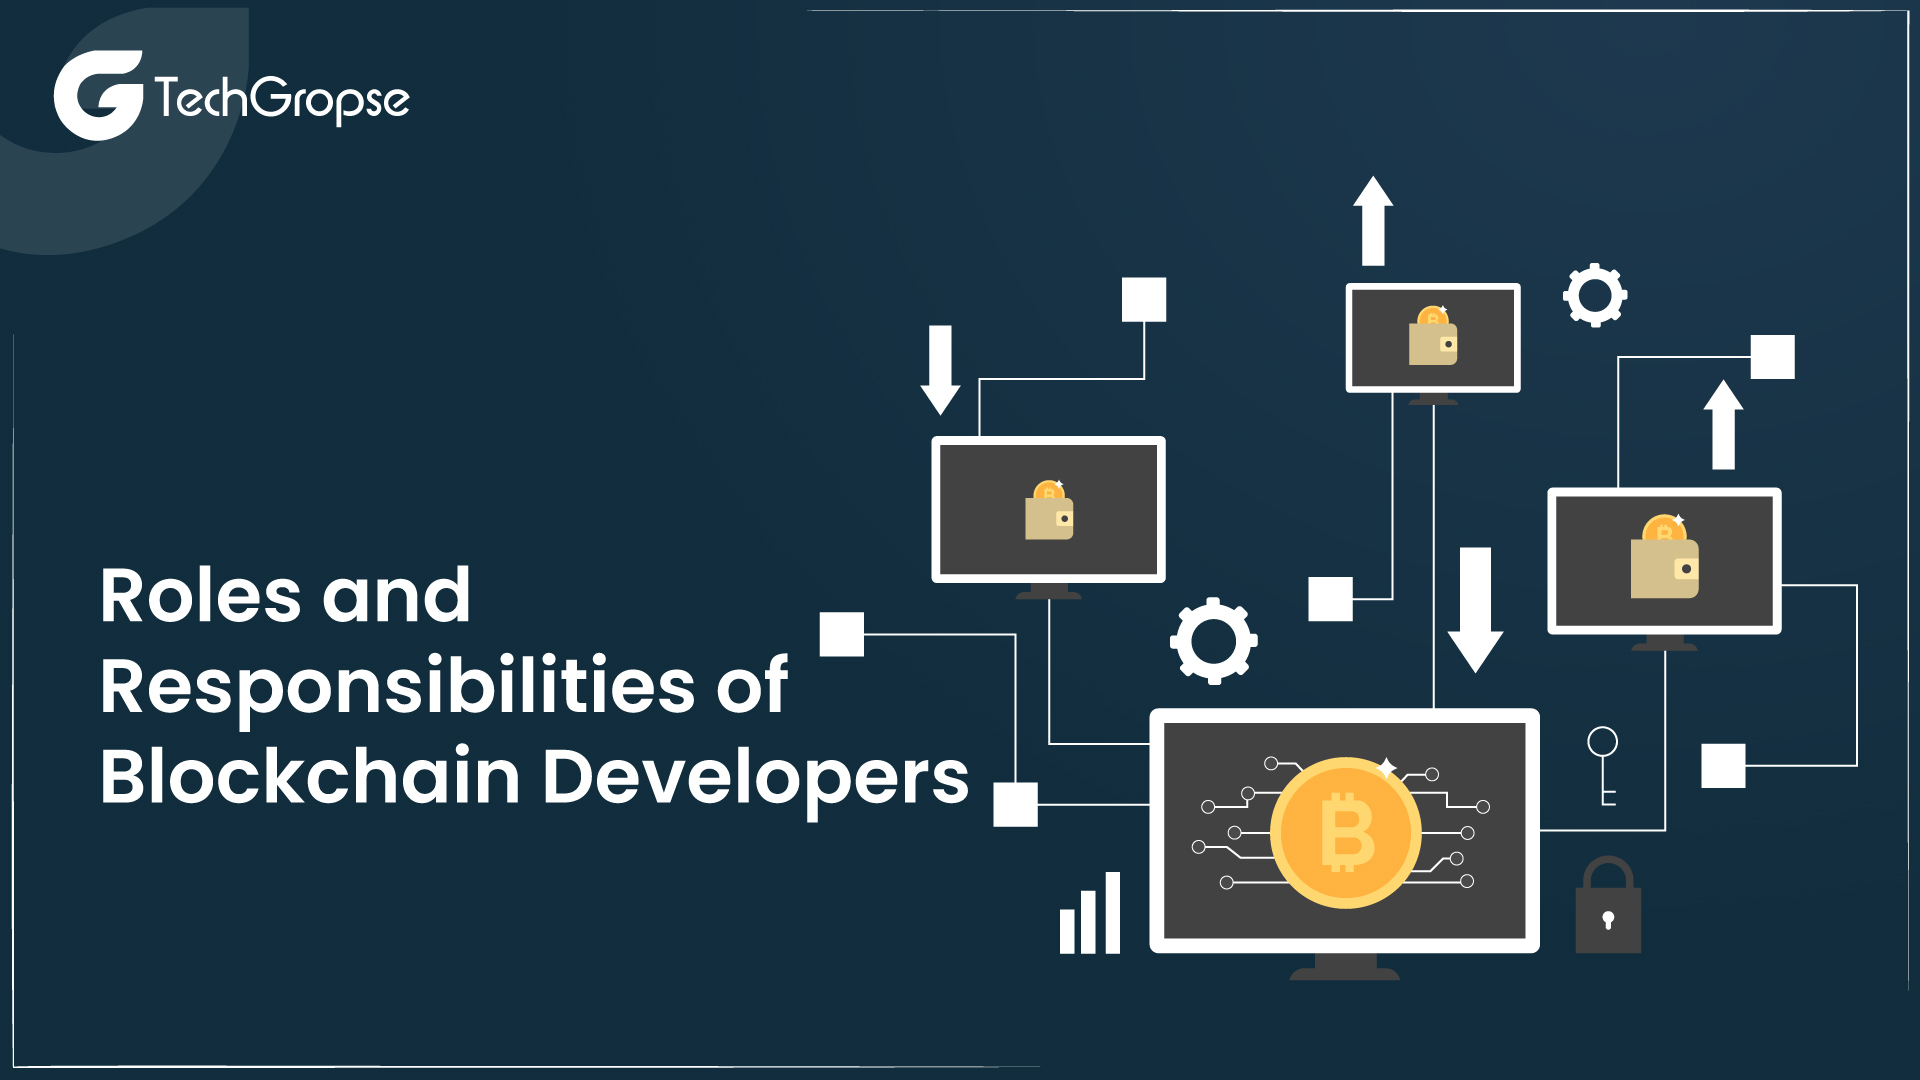 Roles and Responsibilities of Blockchain Developers